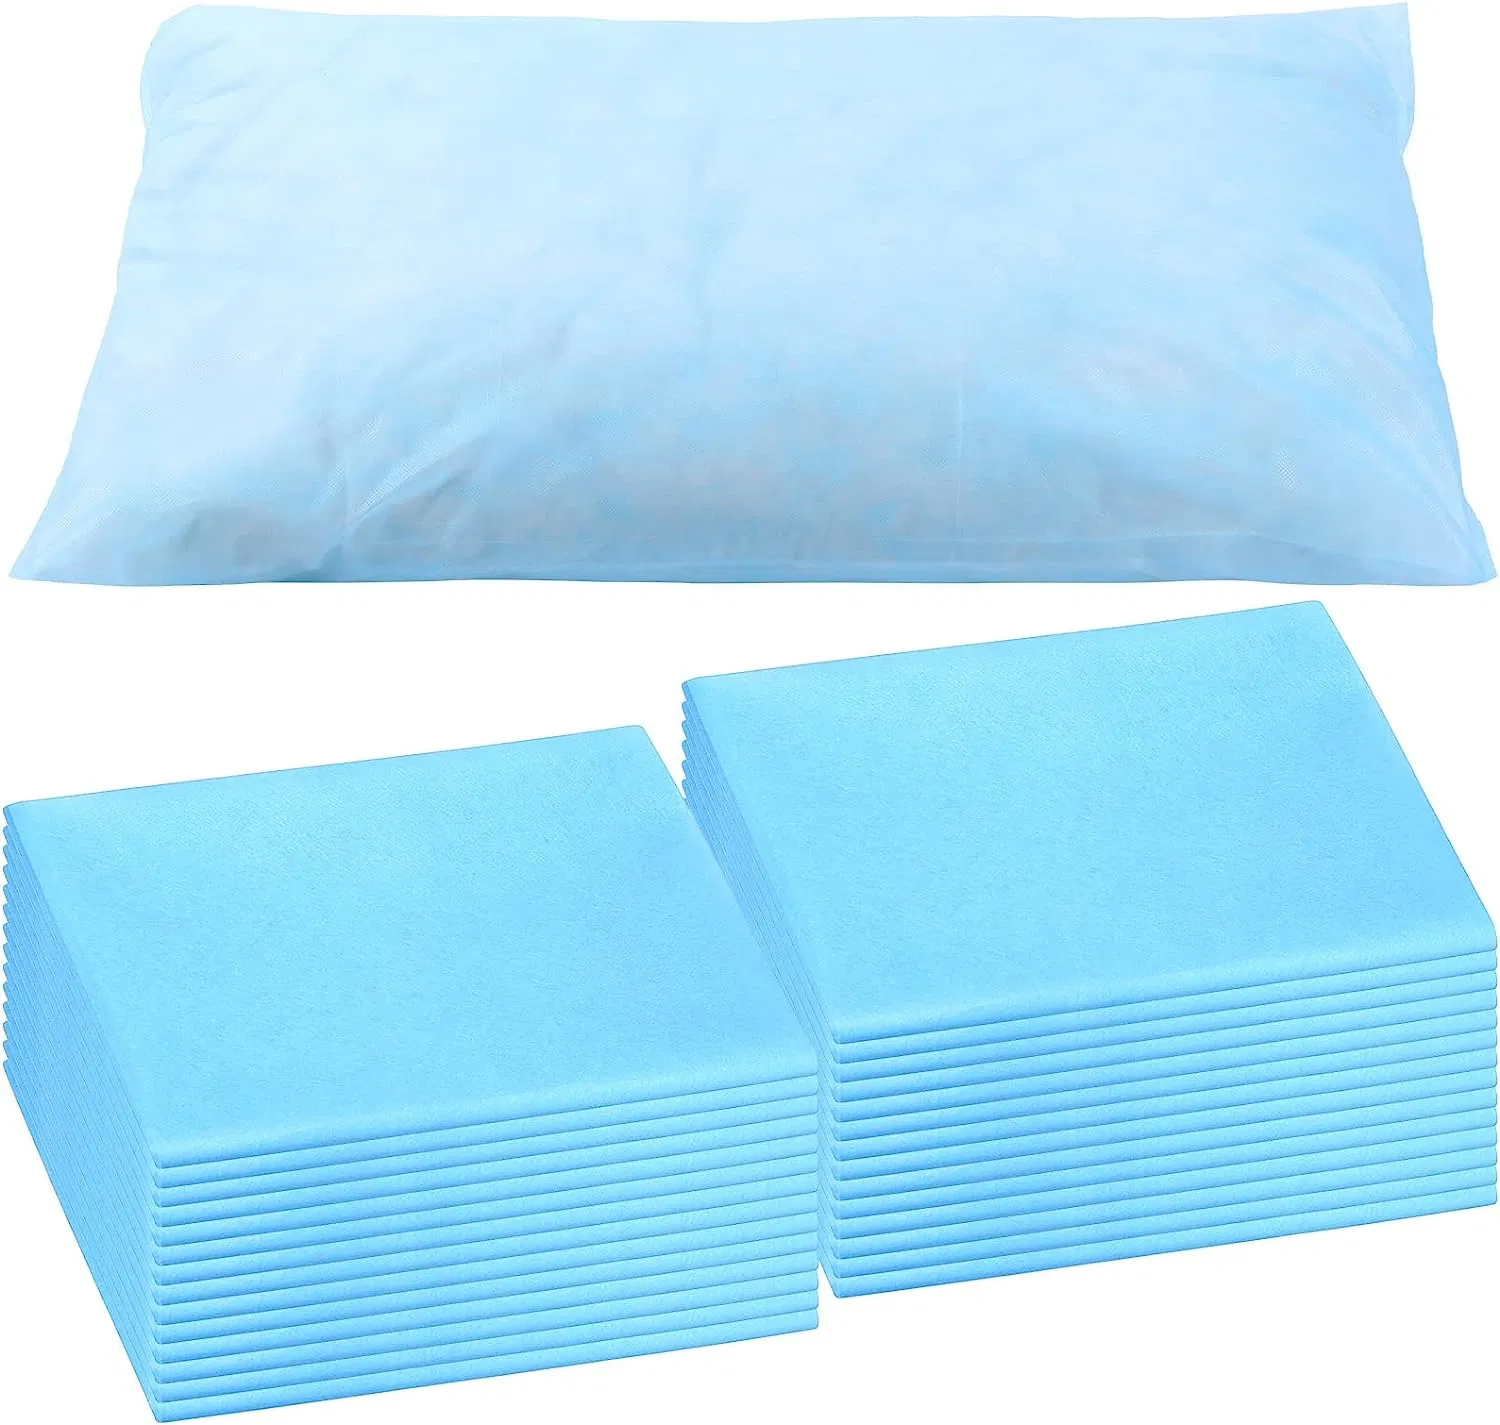 Disposable Pillow Case Medical Disposable Pillow Cover Single Use Pillowcase Non Woven Fabric for Hospitals Hotels Home Bedroom Bedding Supplies, 32 X 20 Inches